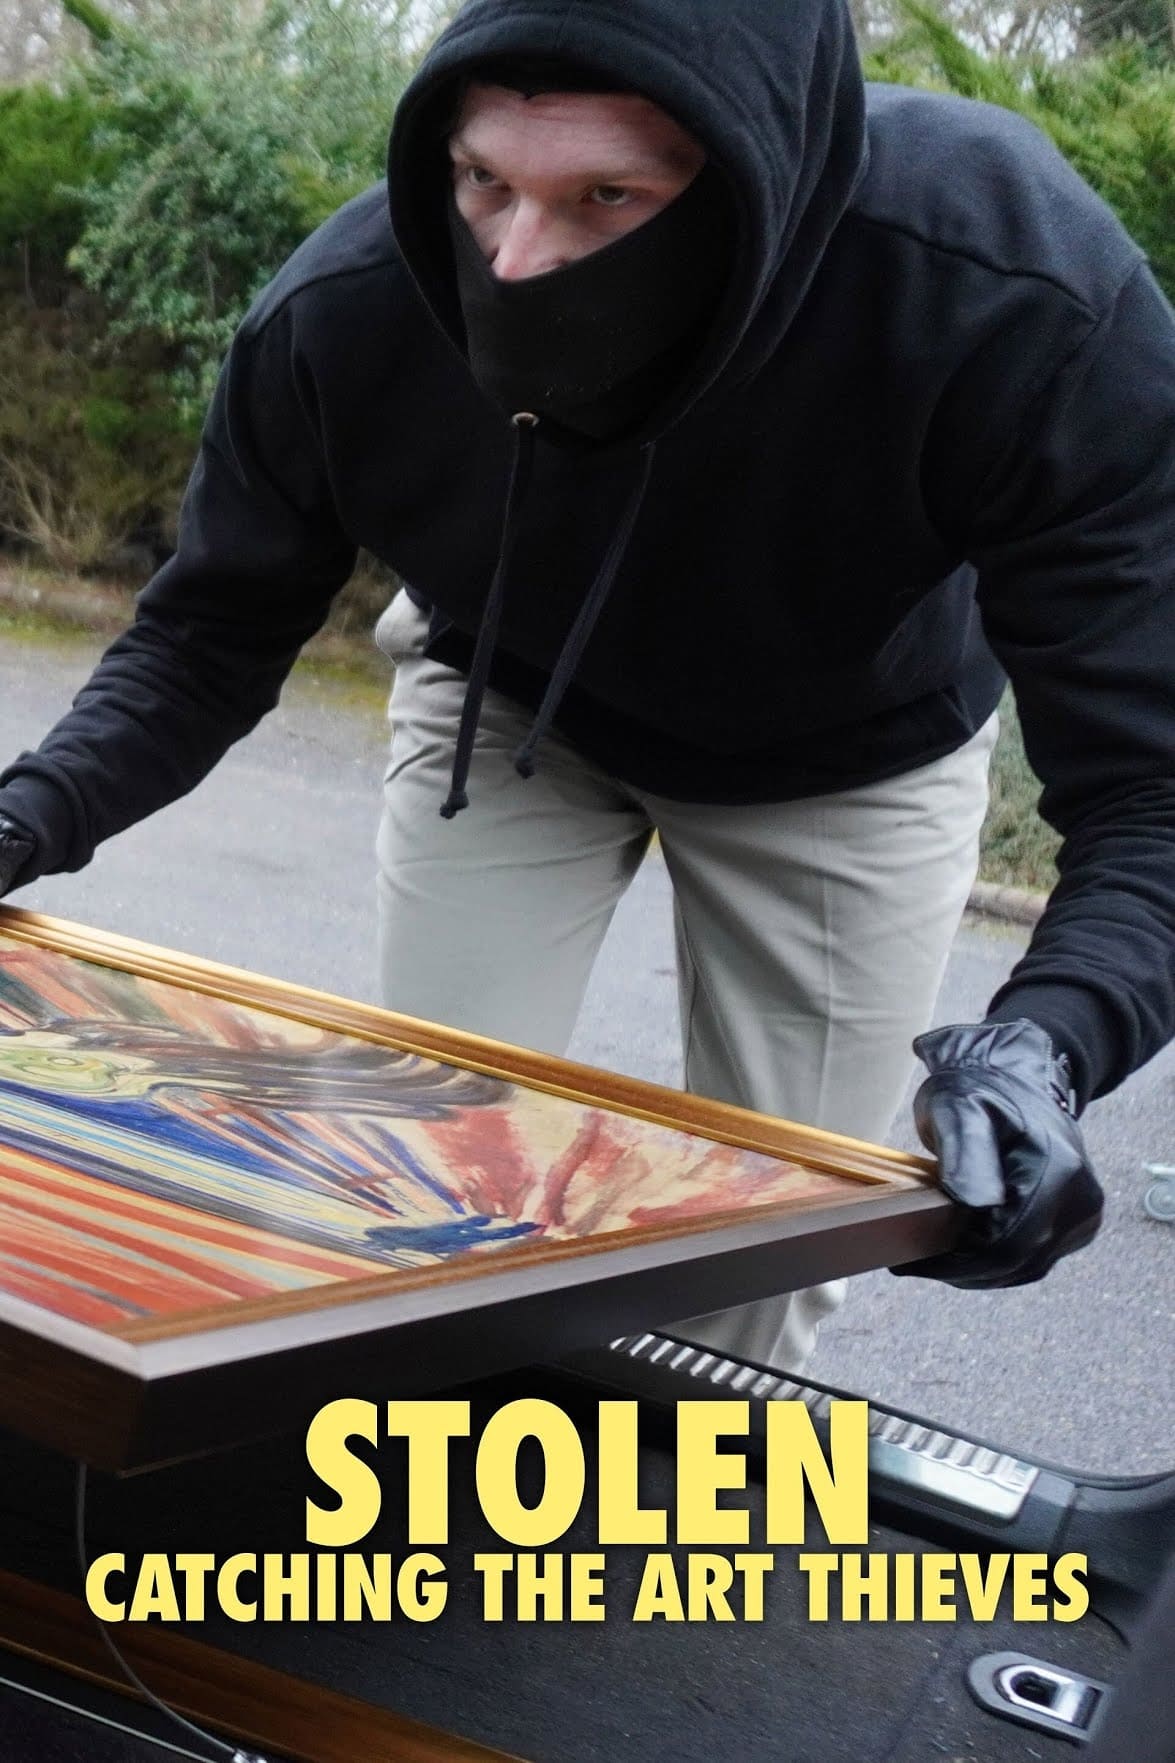 Stolen: Catching the Art Thieves TV Shows About True Crime